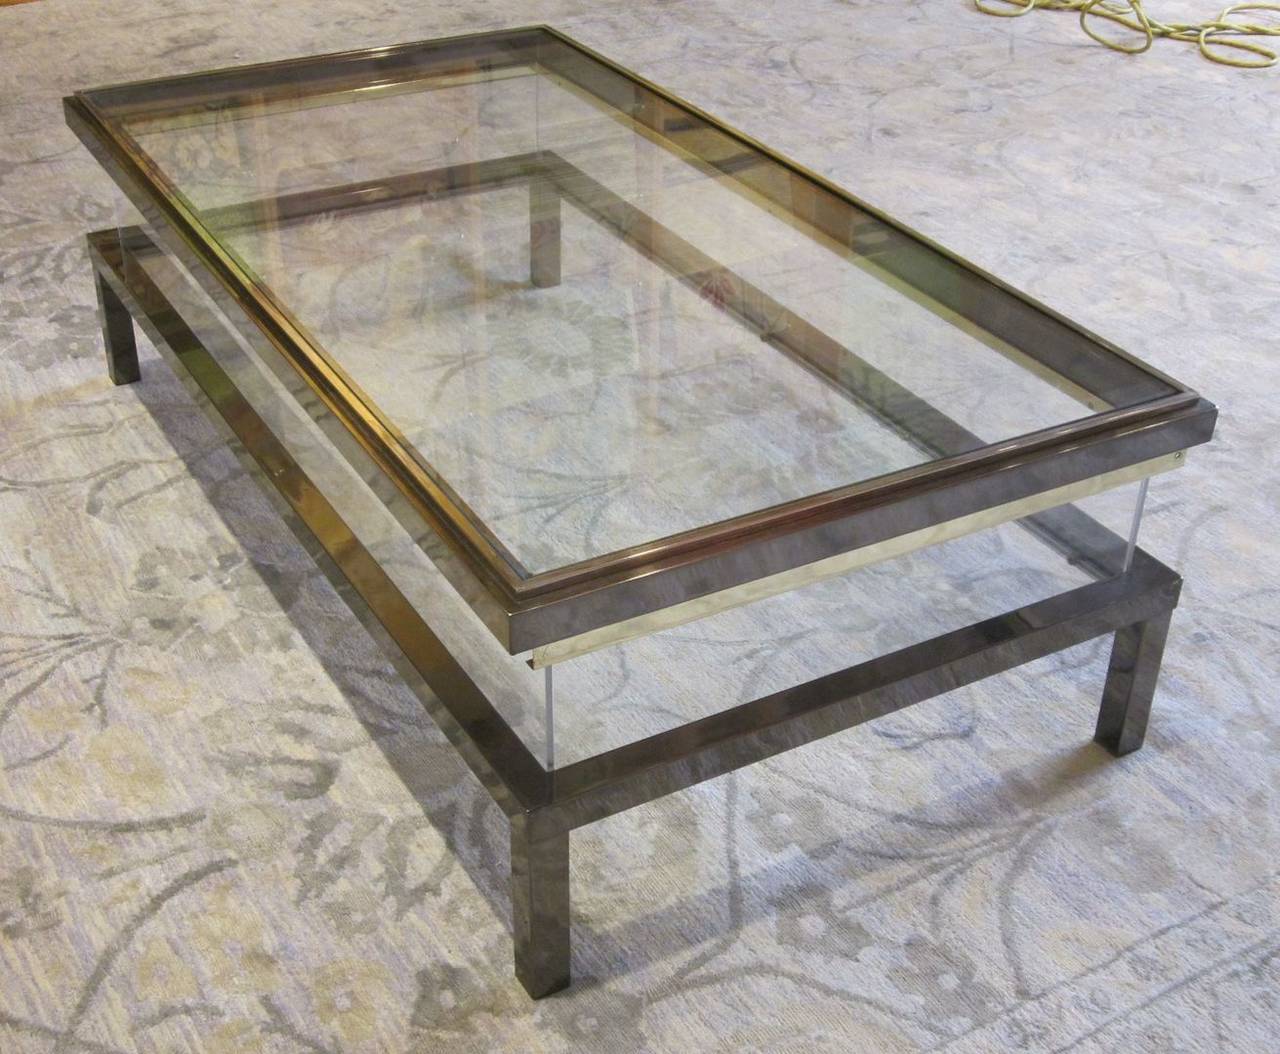 Rectangular vitrine coffee table.
The top slides back to expose the inner shelf.
Plexi sides and glass top and shelf.